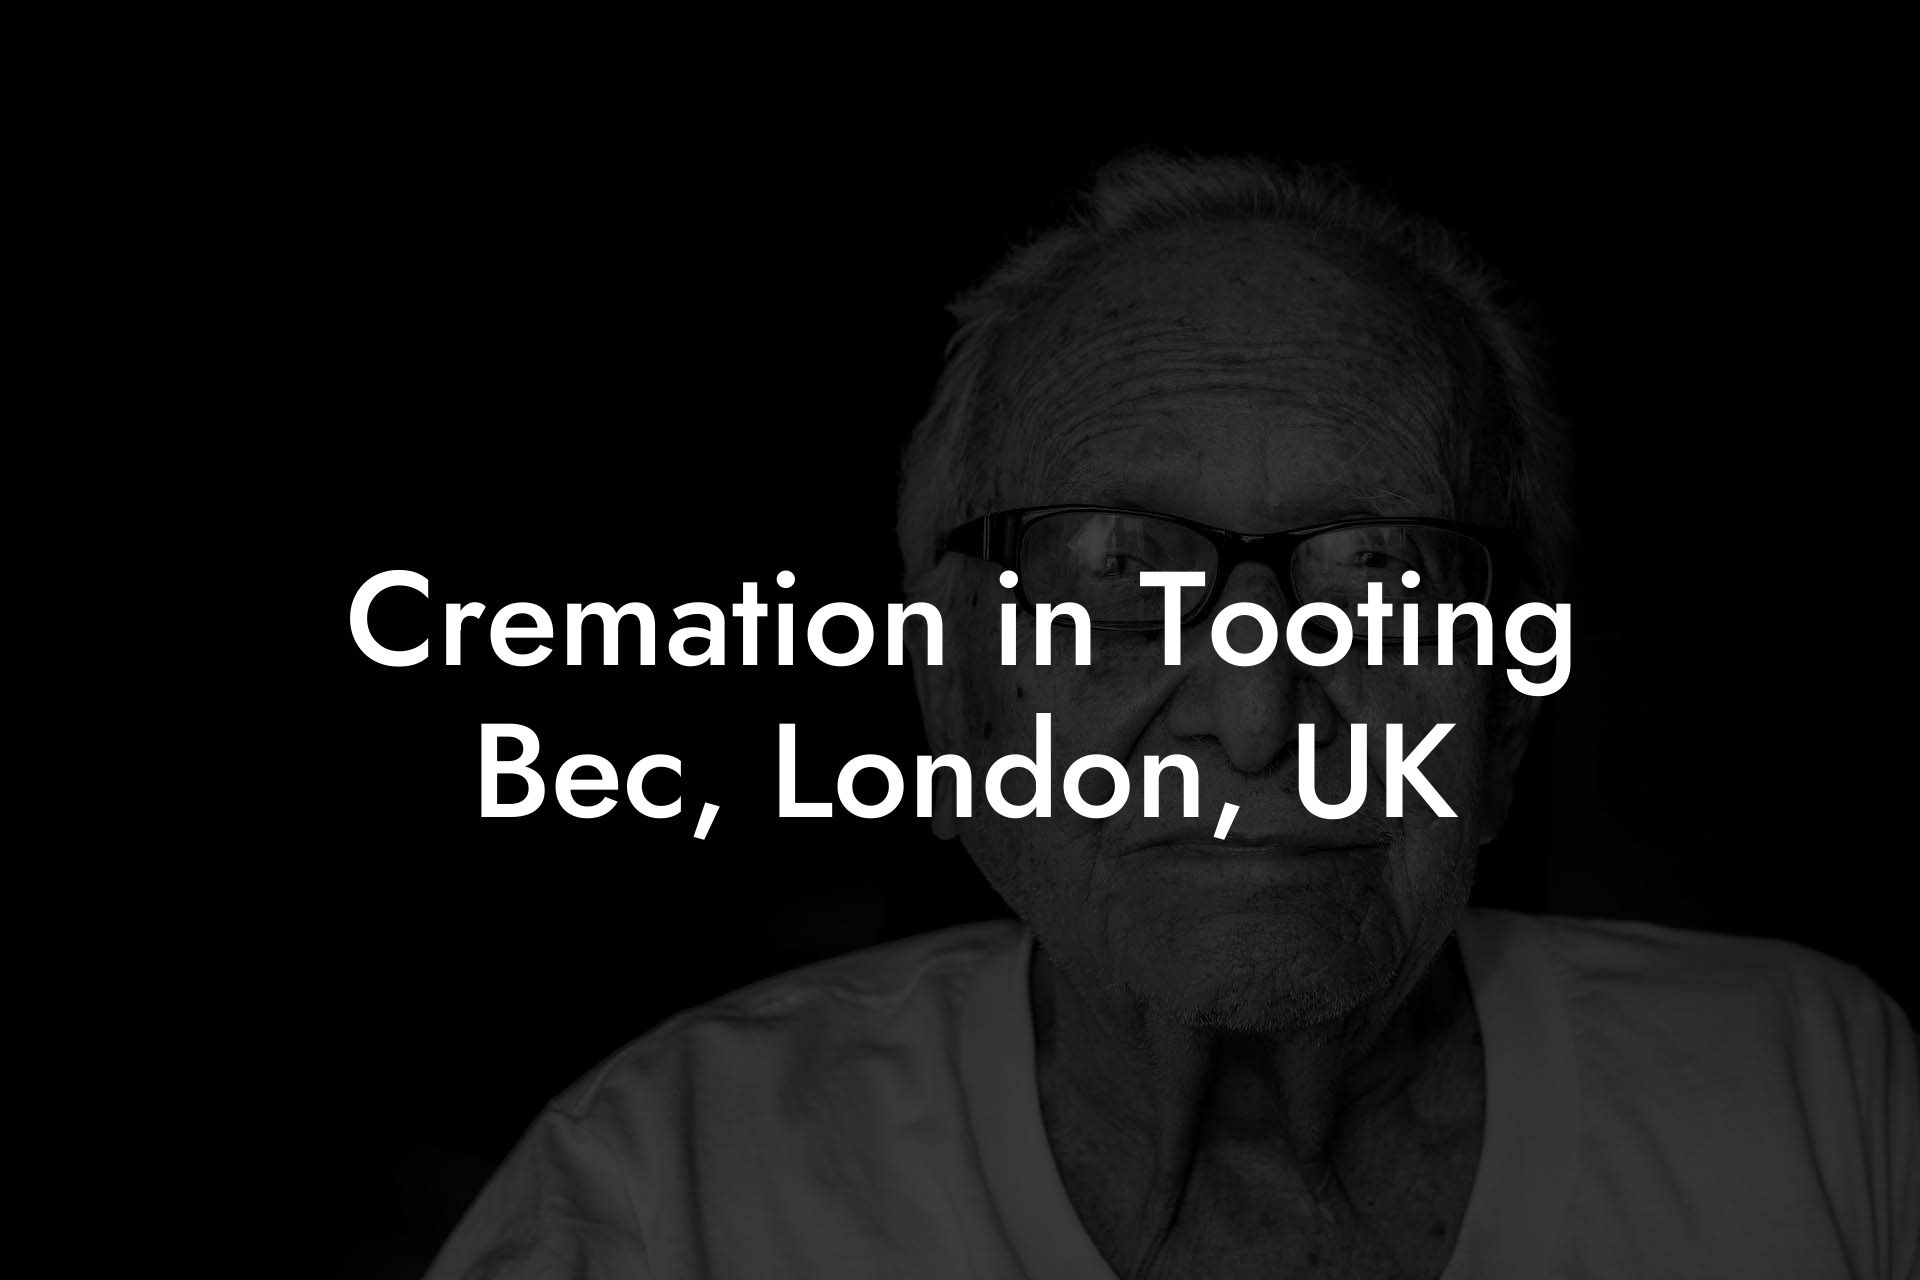 Cremation in Tooting Bec, London, UK